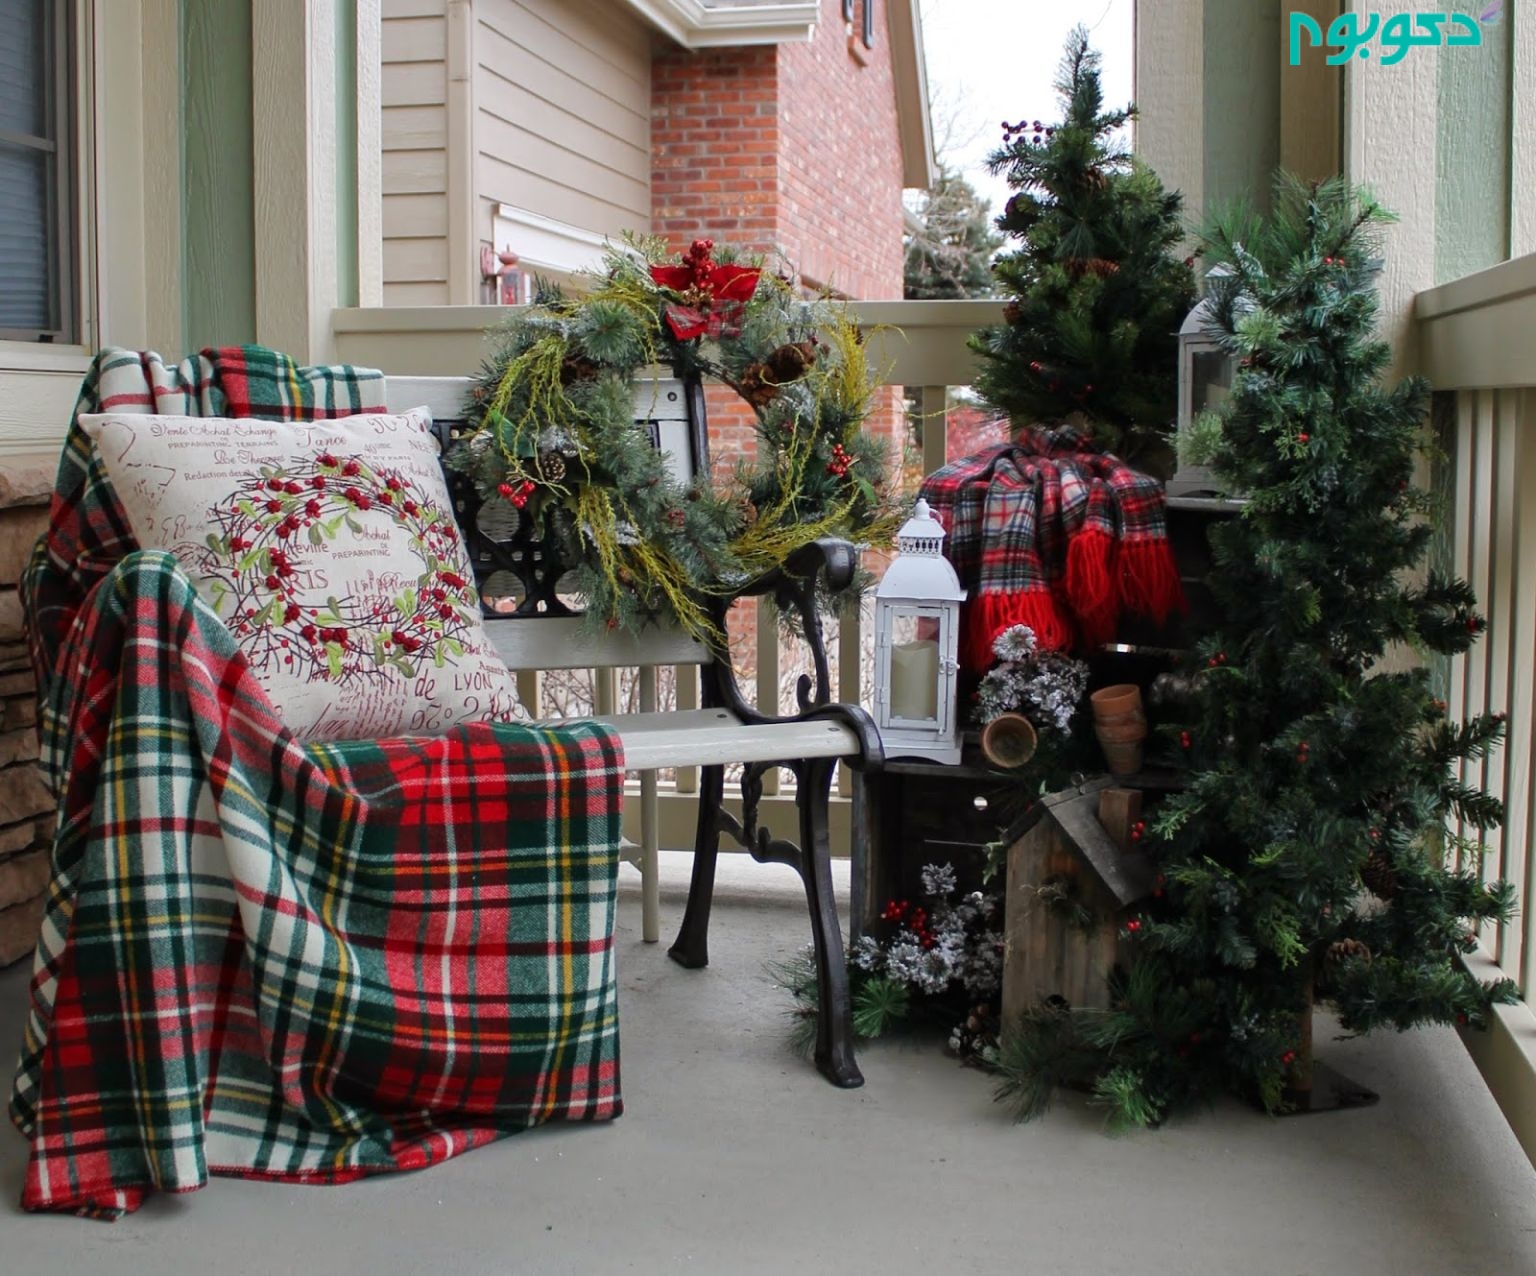 07-holiday-welcome-bench-outdoor-decoration-idea-christmas-homebnc-768x638@2x.jpg